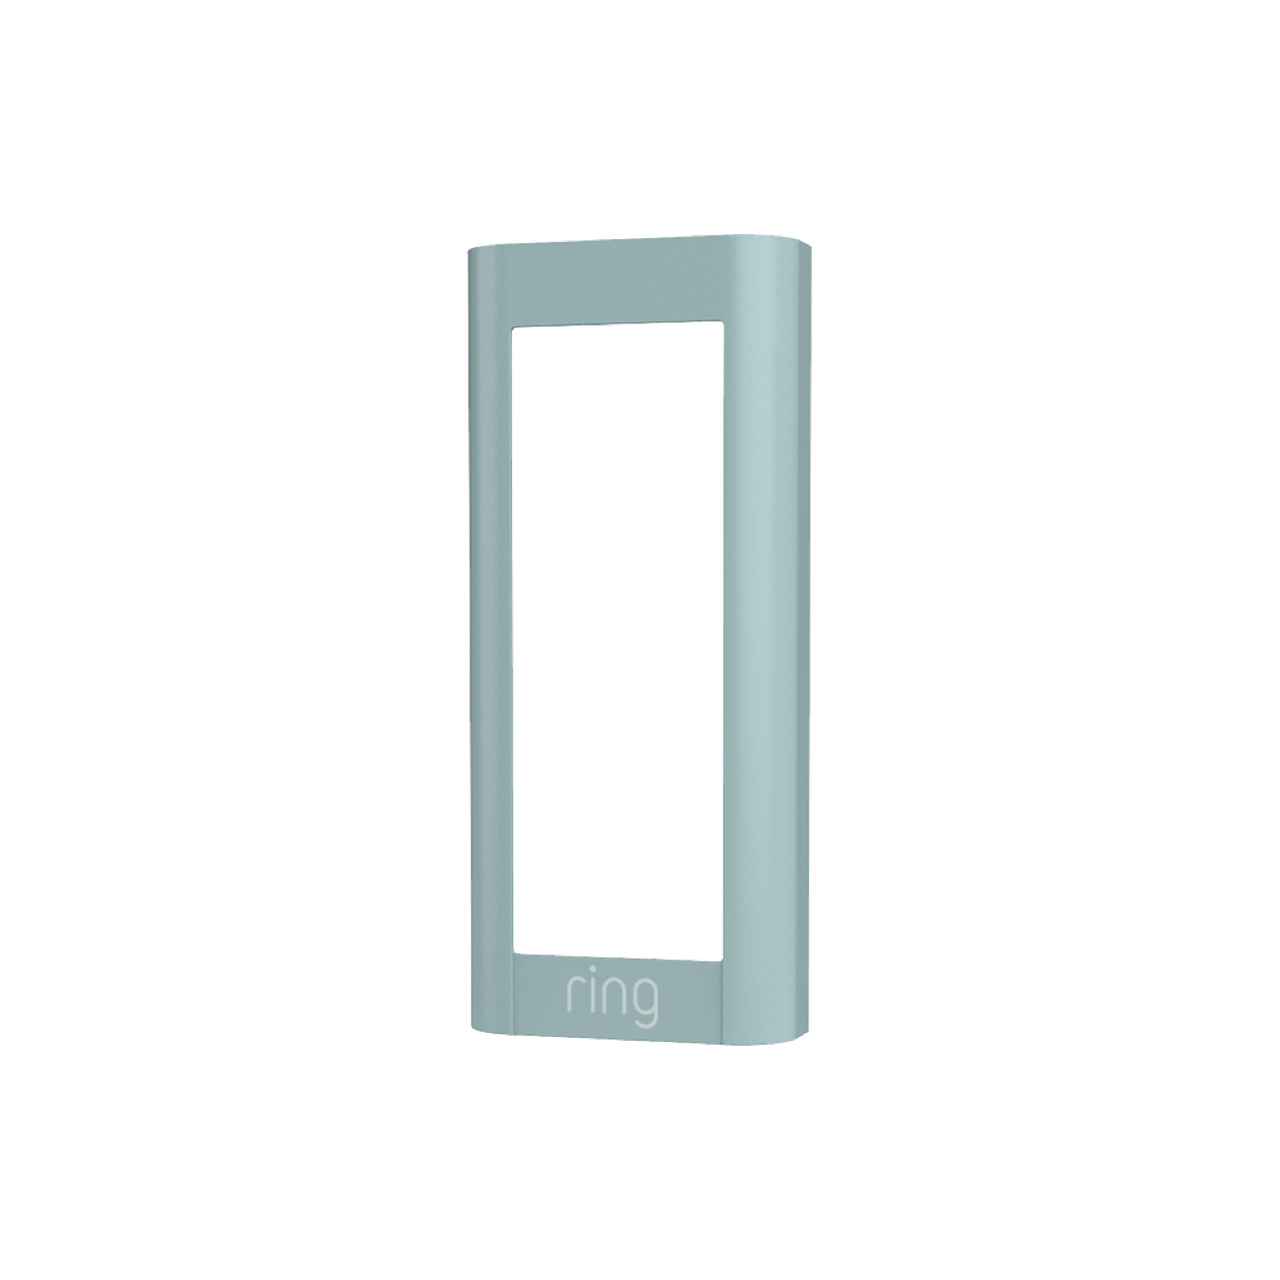 products/JF_interchangeableFaceplate_blueprint_1029x1029_7fbae7b4-4c01-495f-8e94-5214d84a1feb.png